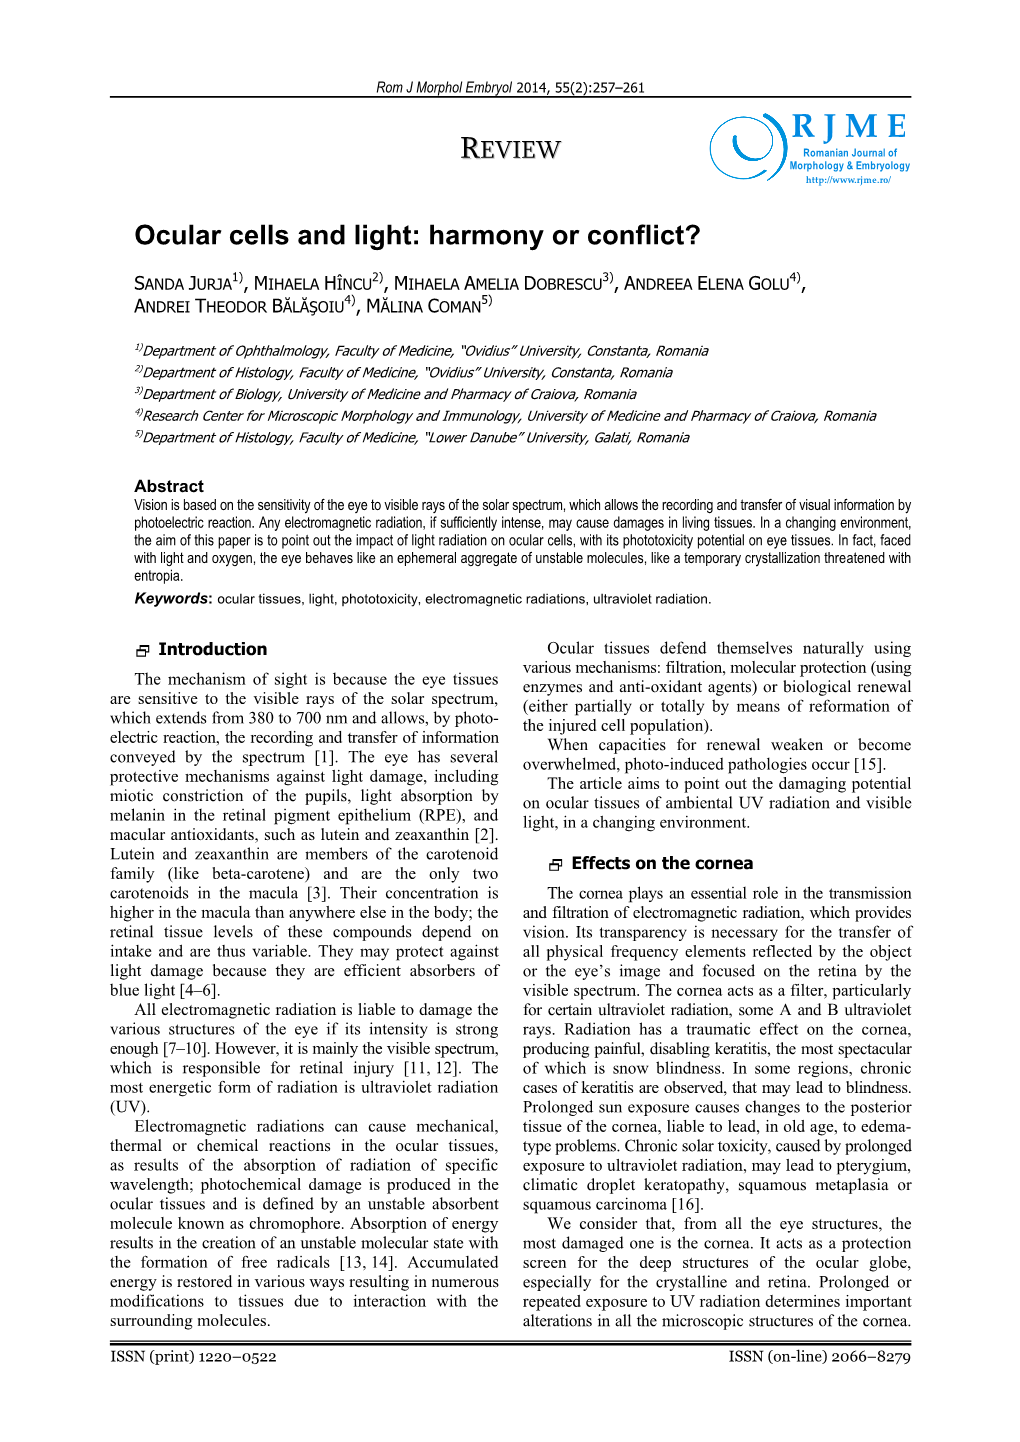 Ocular Cells and Light: Harmony Or Conflict?